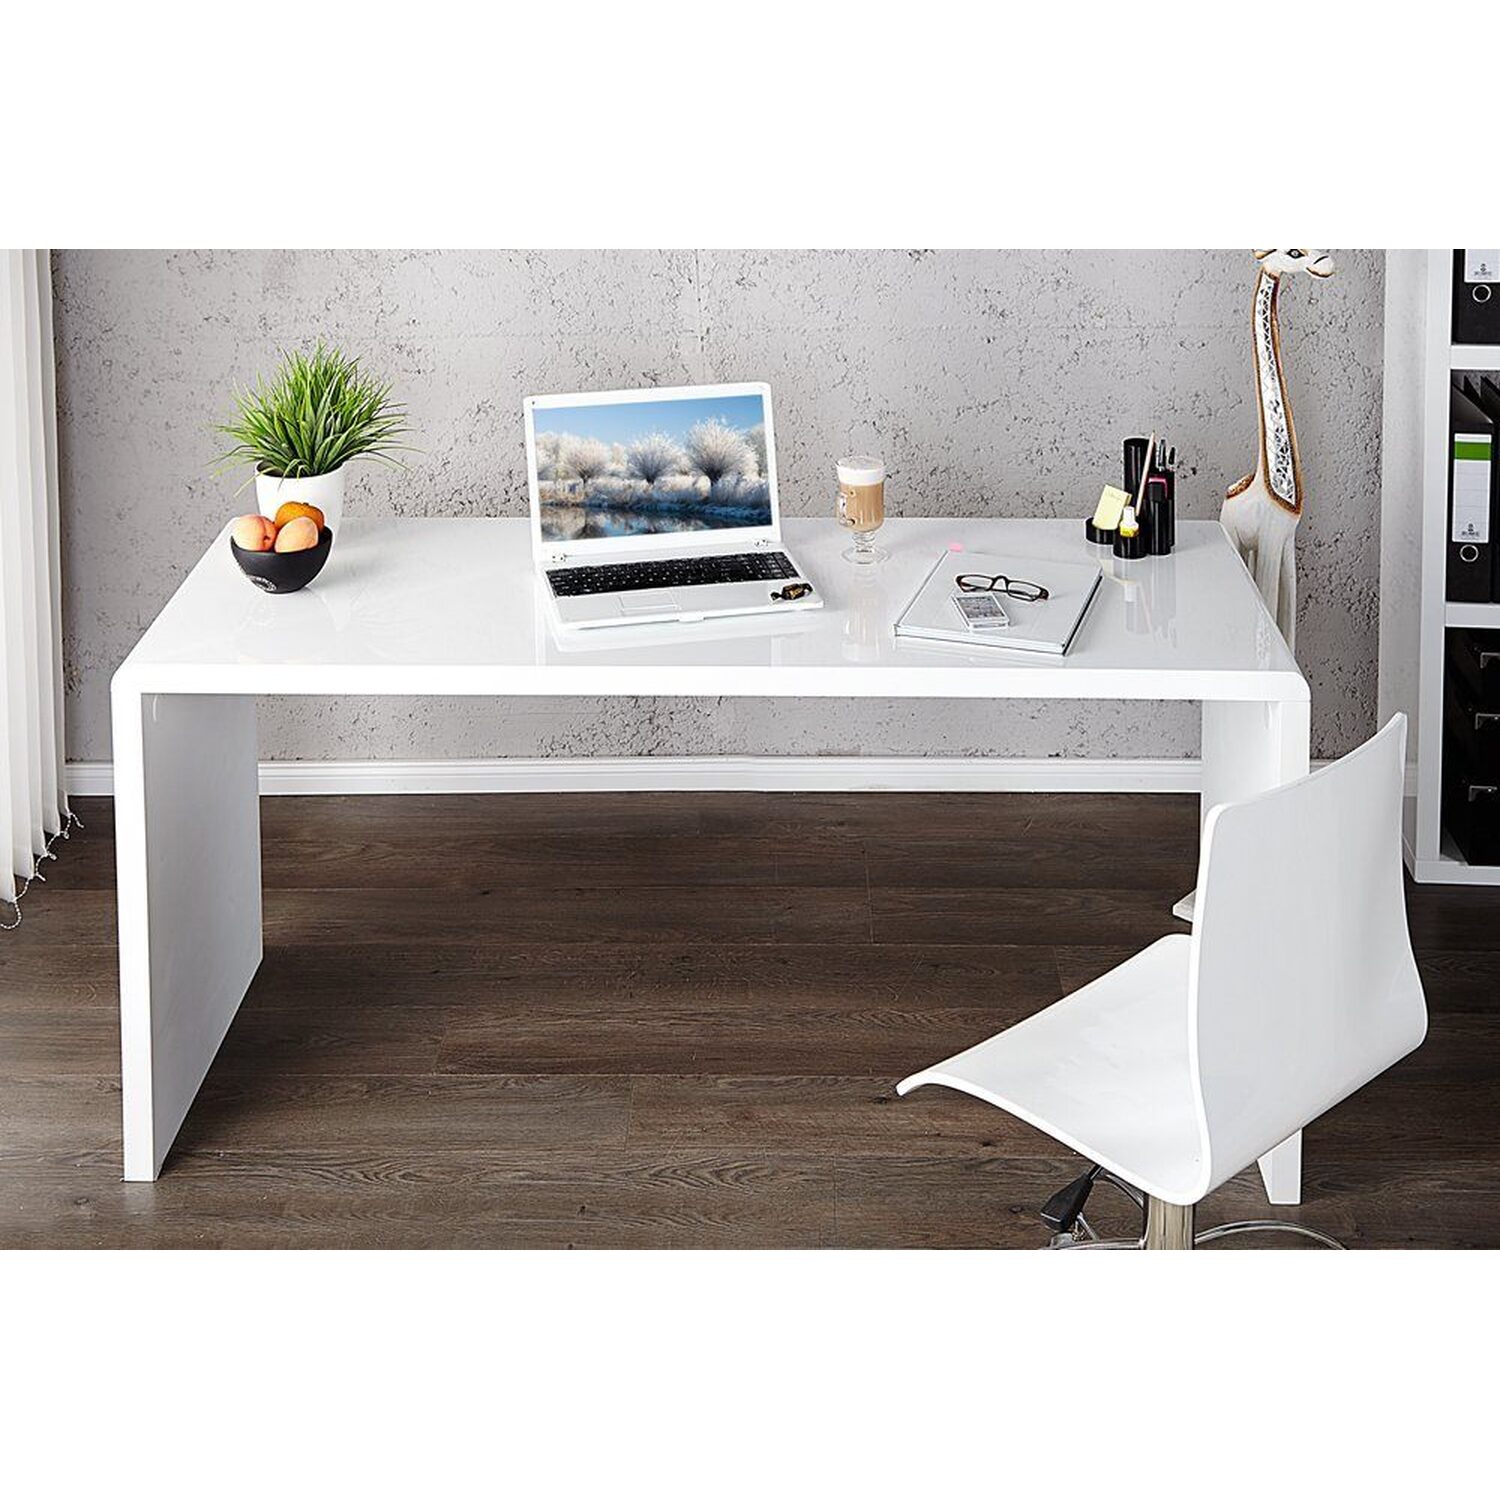 Designer Gloss White lacquer desk 1200 w x 600 d x 750 h with curved panels 